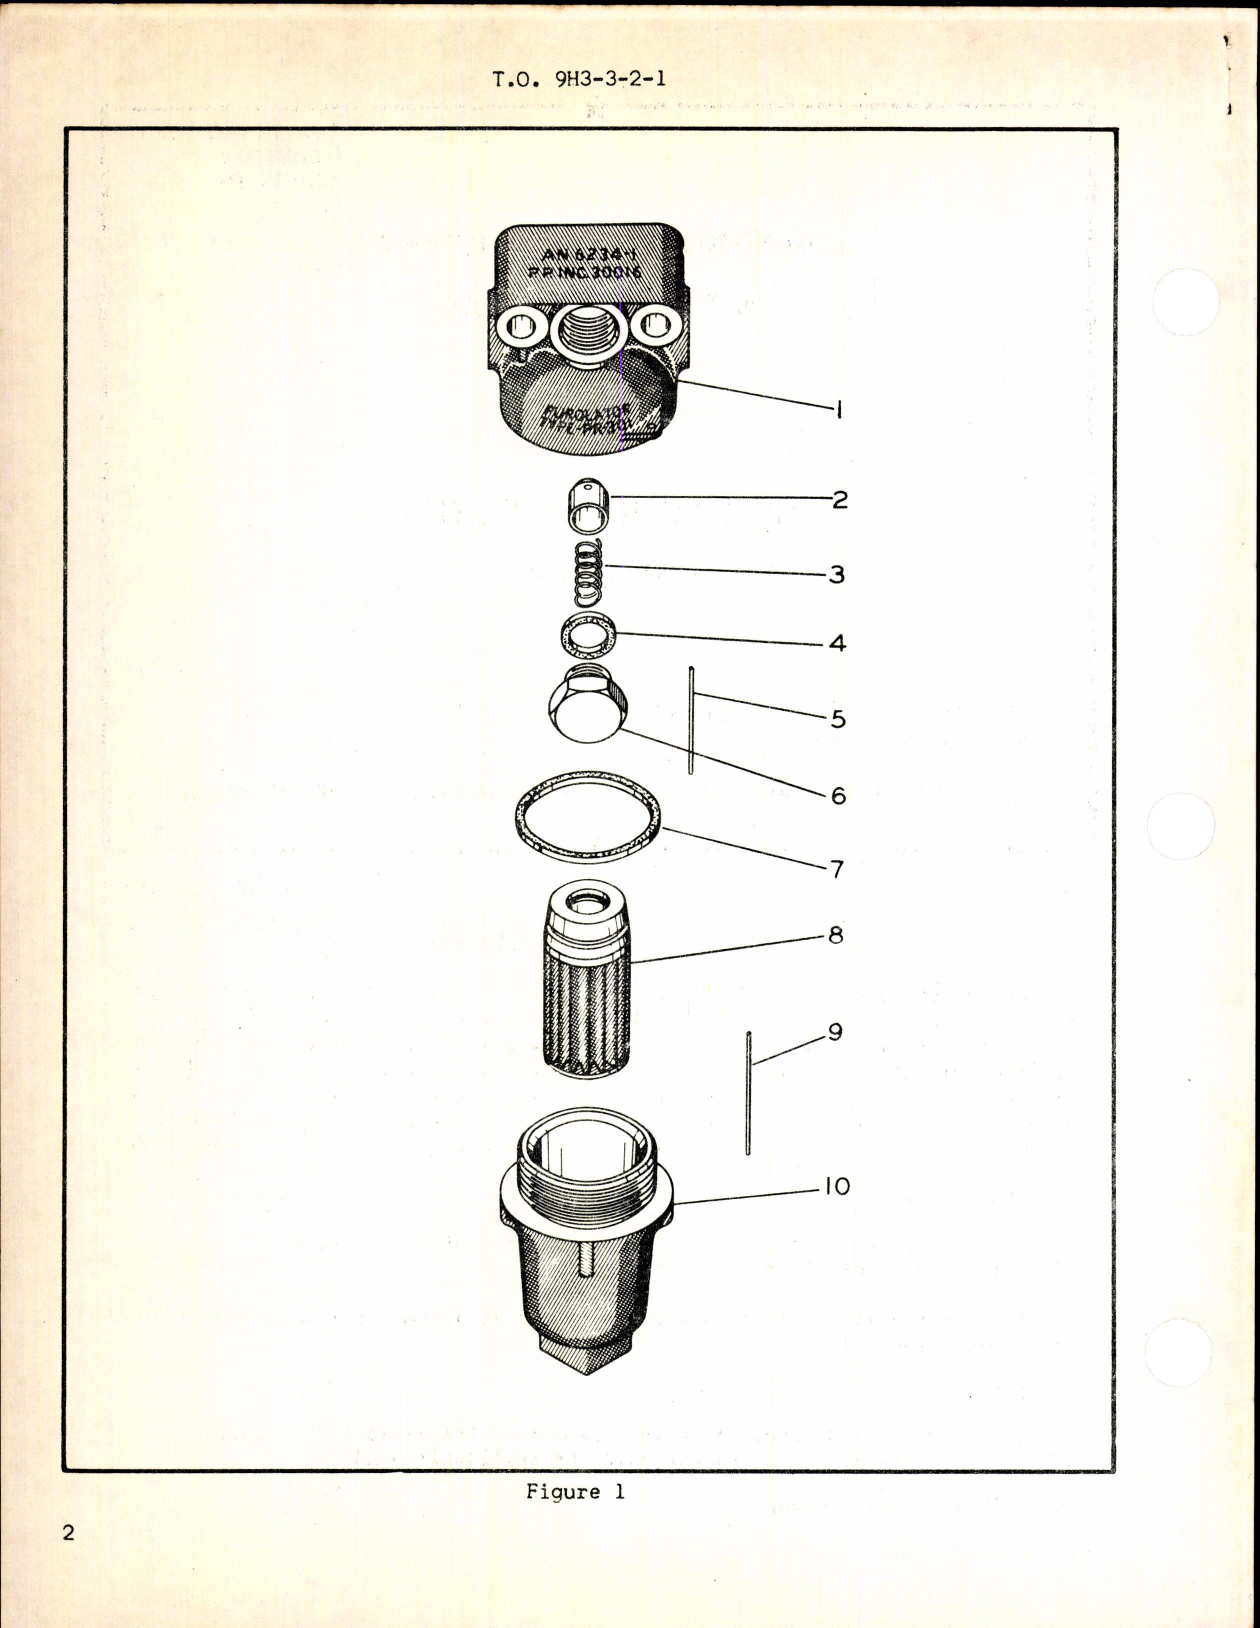 Sample page 2 from AirCorps Library document: Instructions w PC for Hydraulic Oil Filter AN6234-1